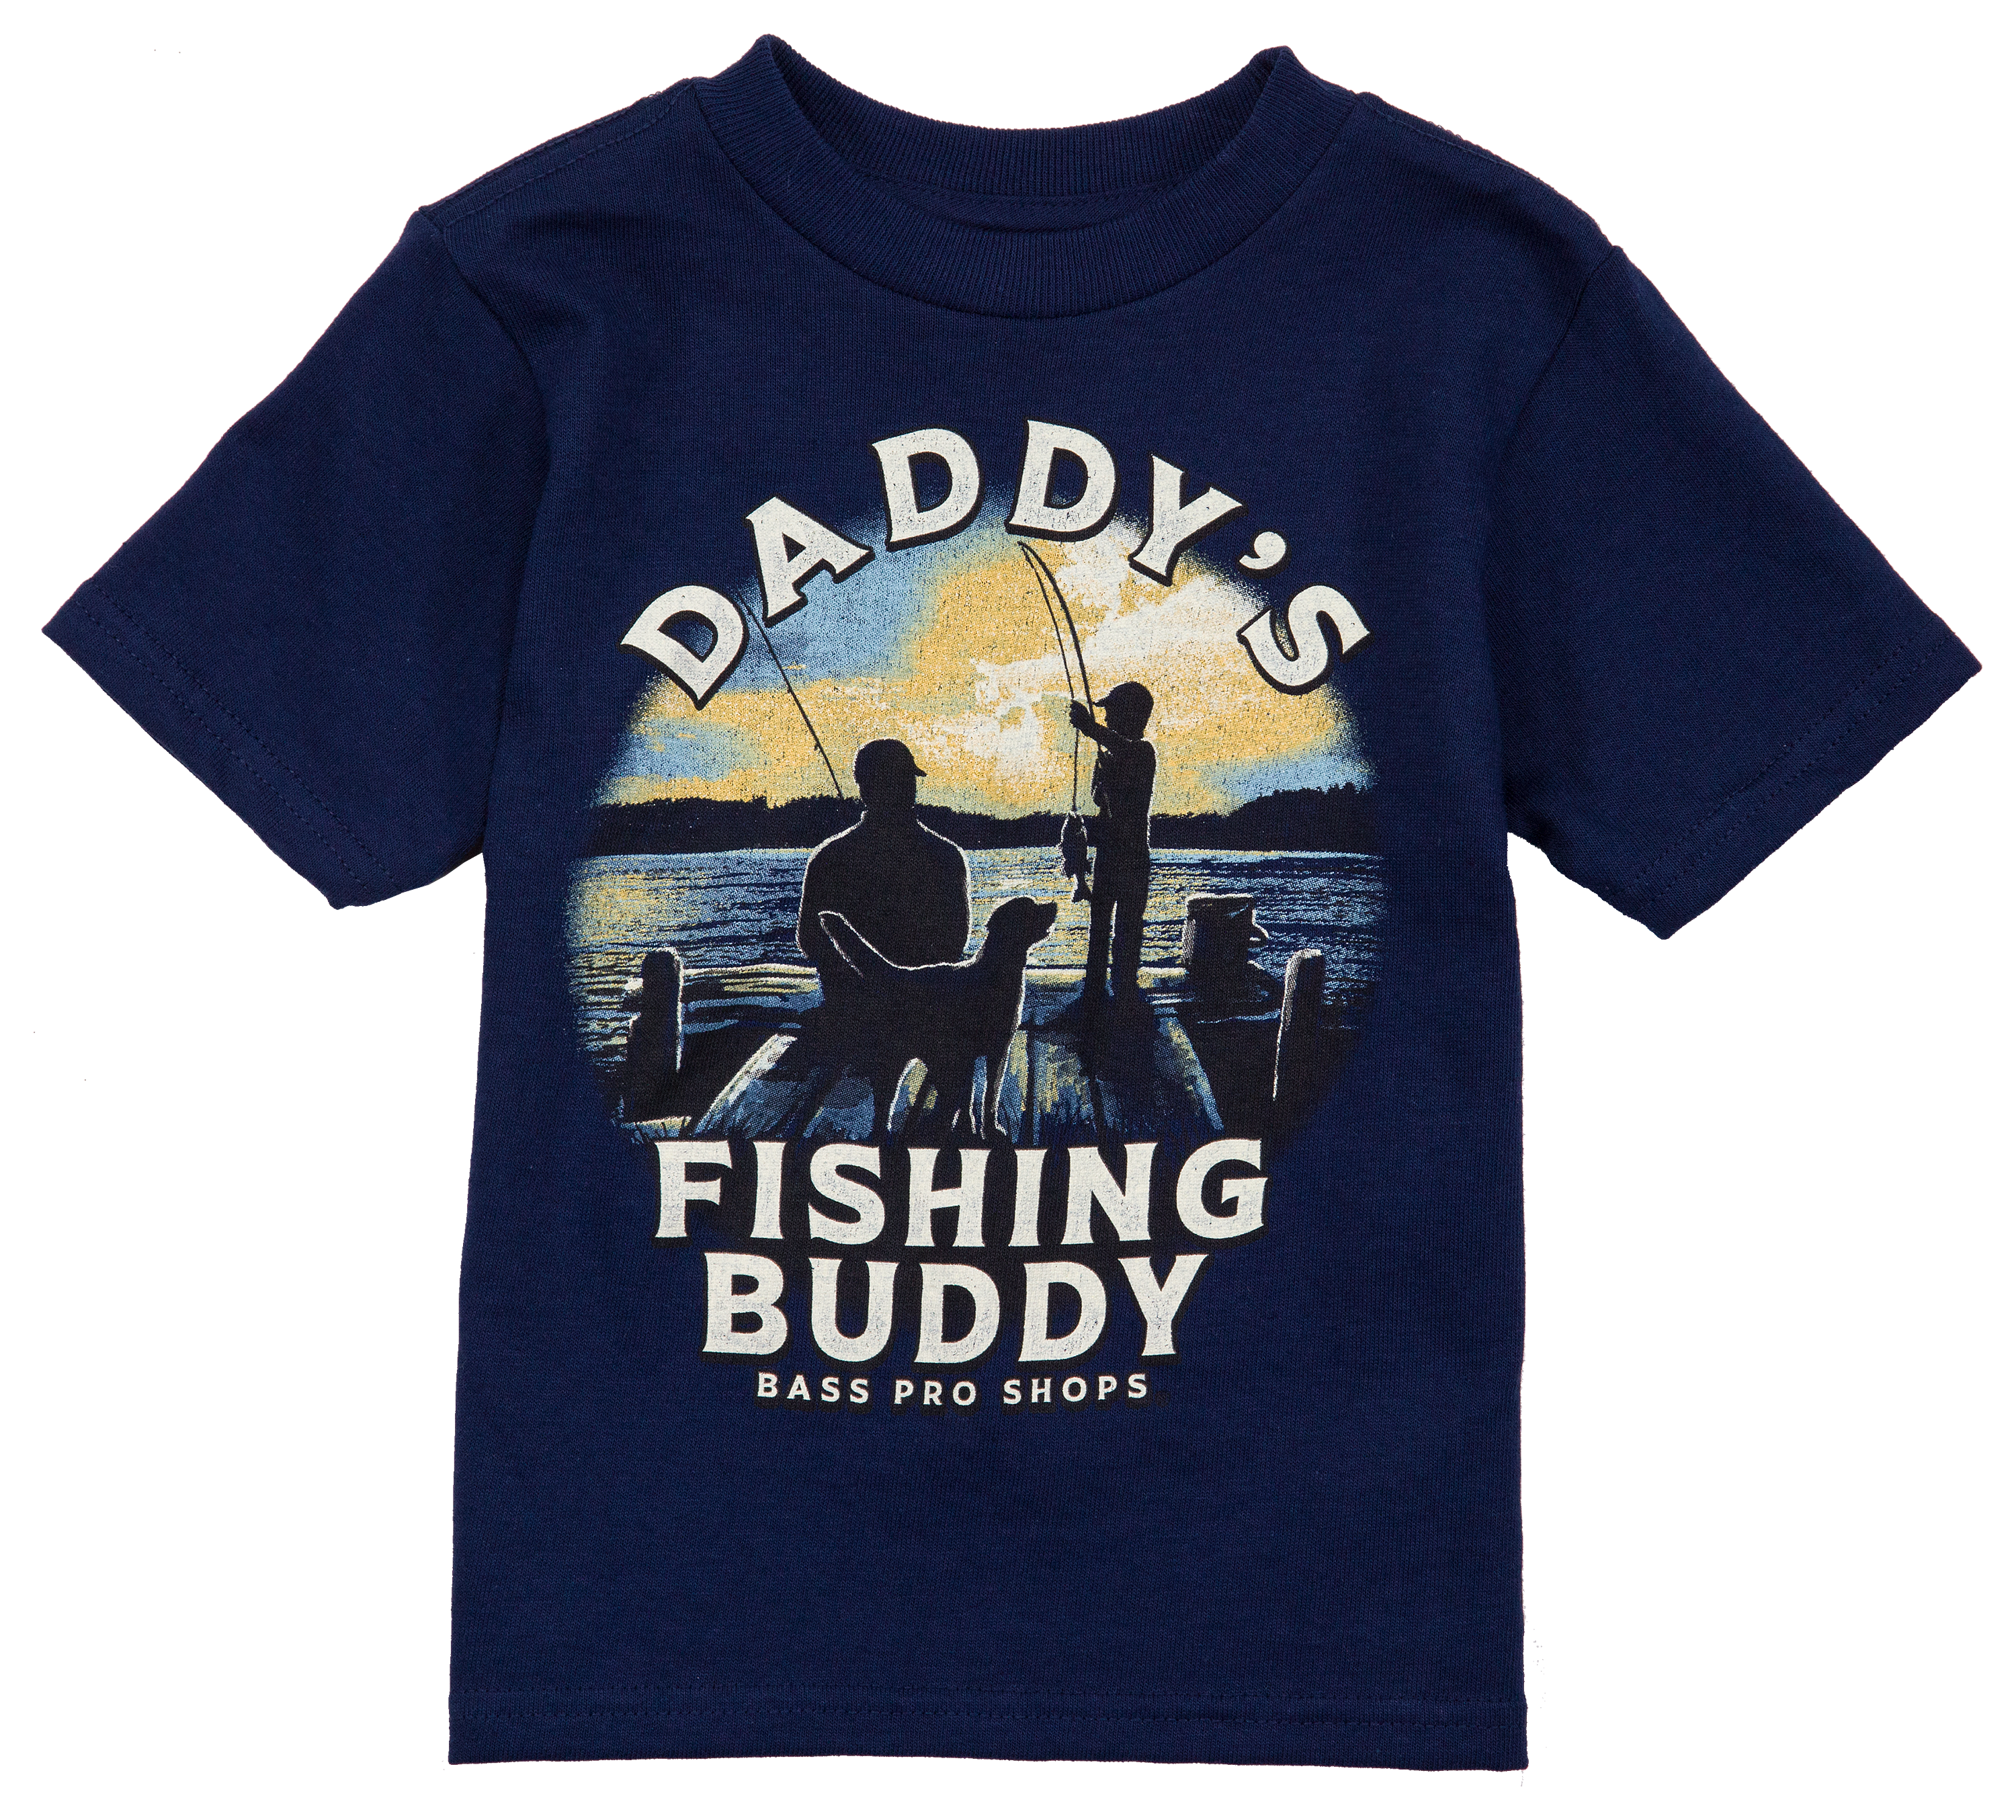 Bass Pro Shops Fishing Buddy Short-Sleeve T-Shirt for Toddlers or